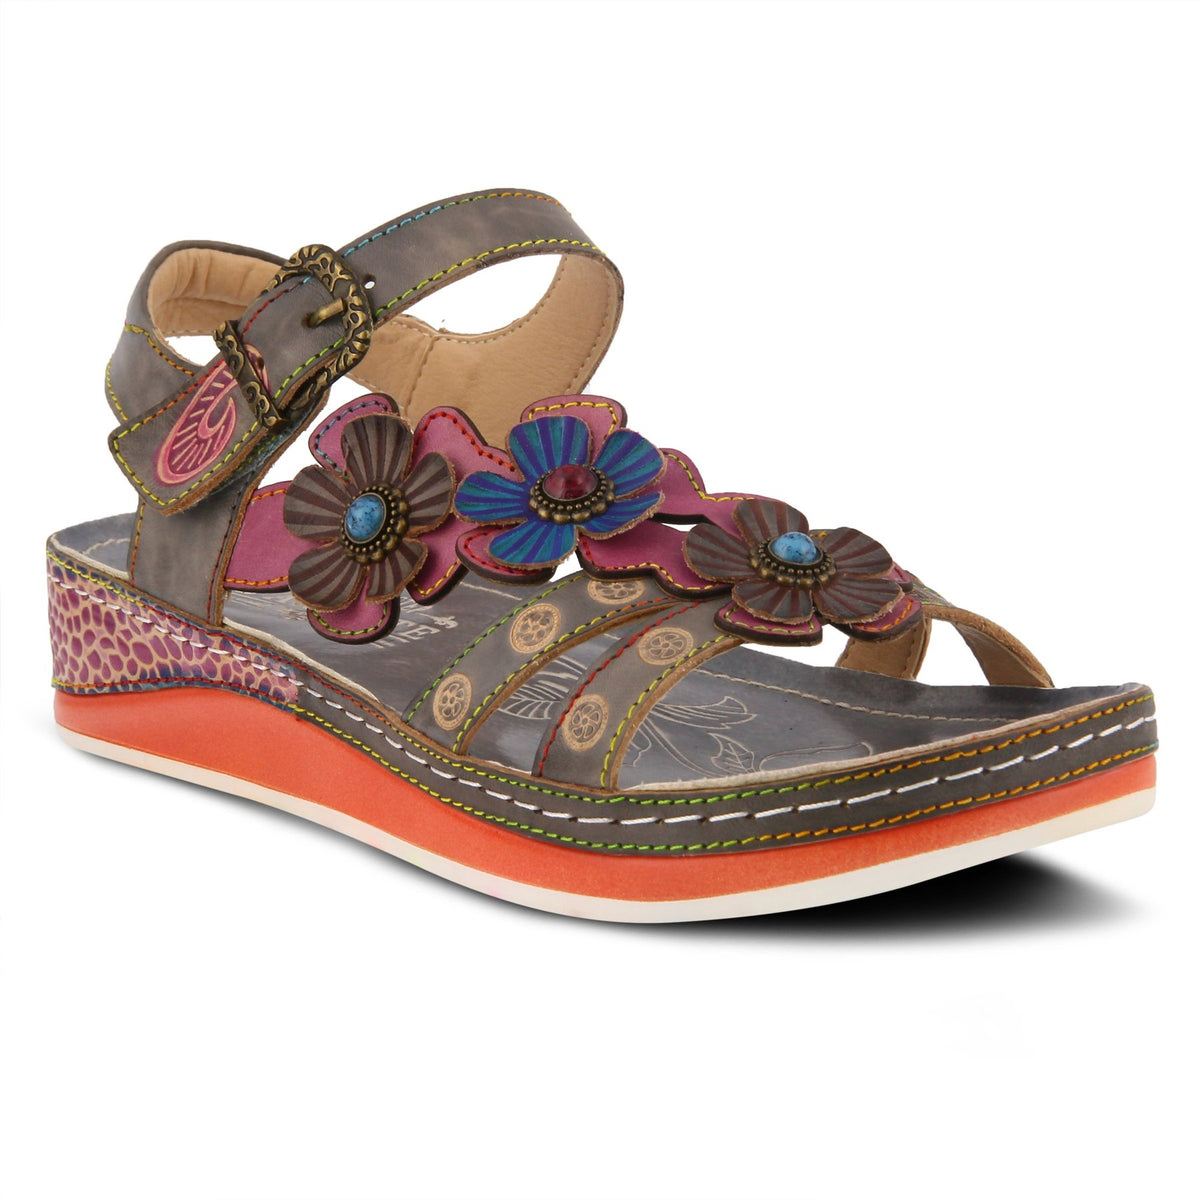 L'Artiste by Springstep Footwear Goodie French inspired, hand-painted leather asymmetrical sandal is full of color and charm with an embossed floral design complimented with dimensional multi-color leather flowers centered with ornate buttons to brighten any outfit!